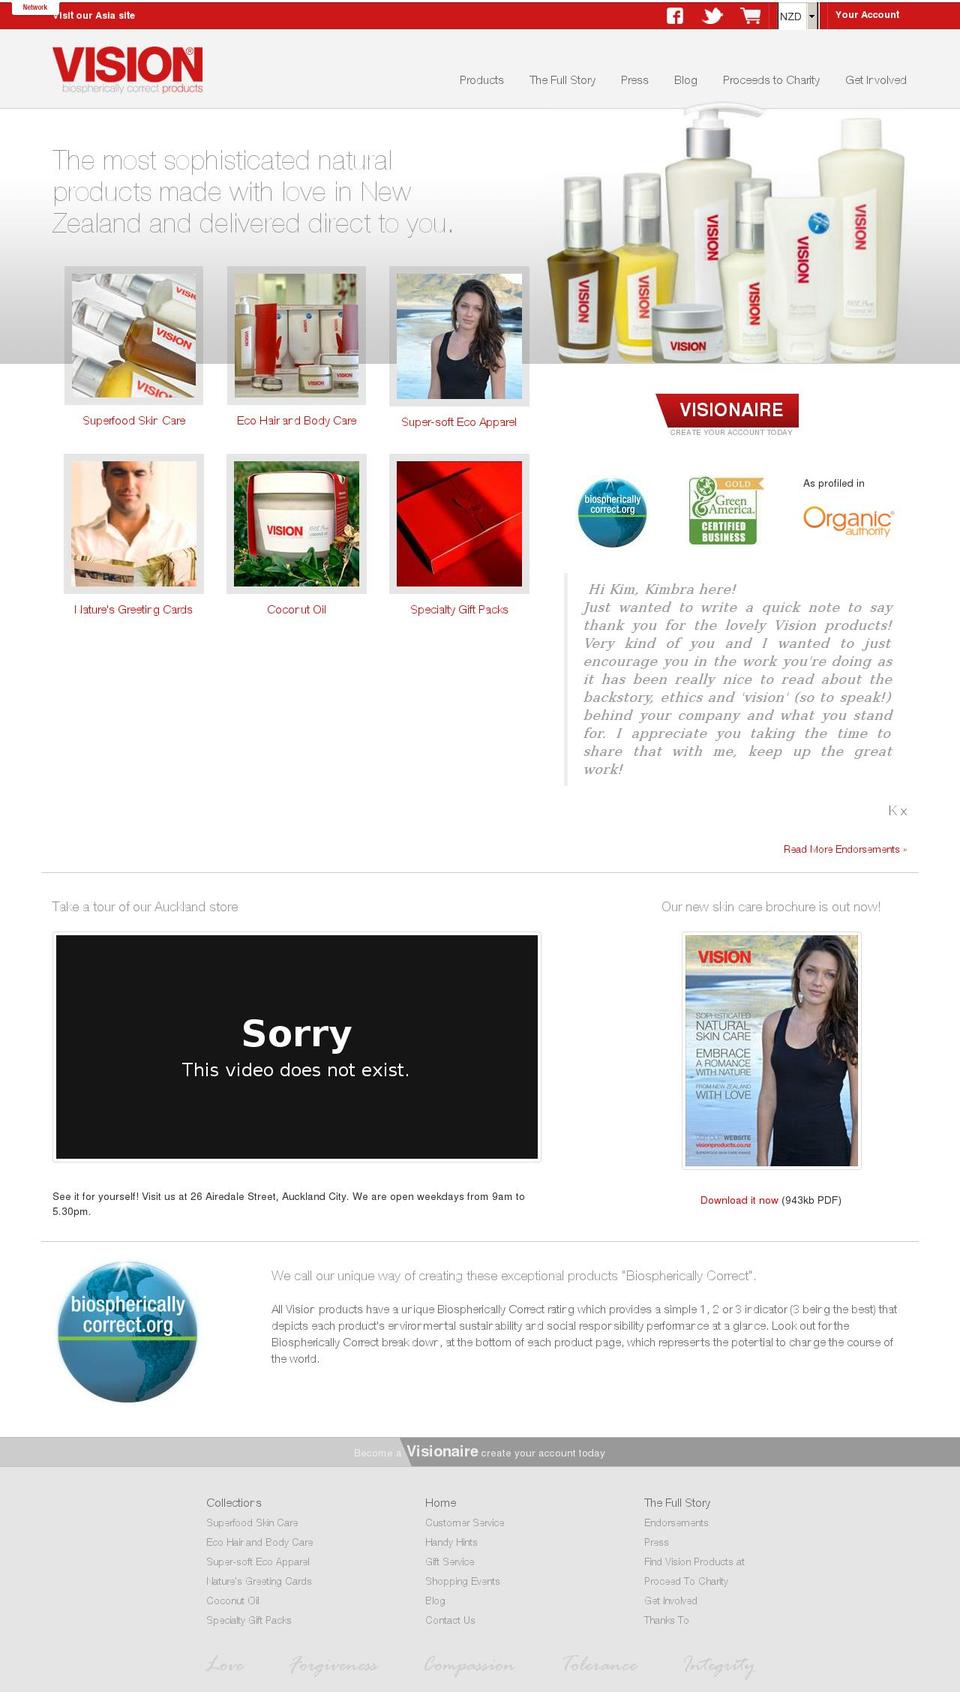 Vision Shopify theme site example visionproducts.co.nz